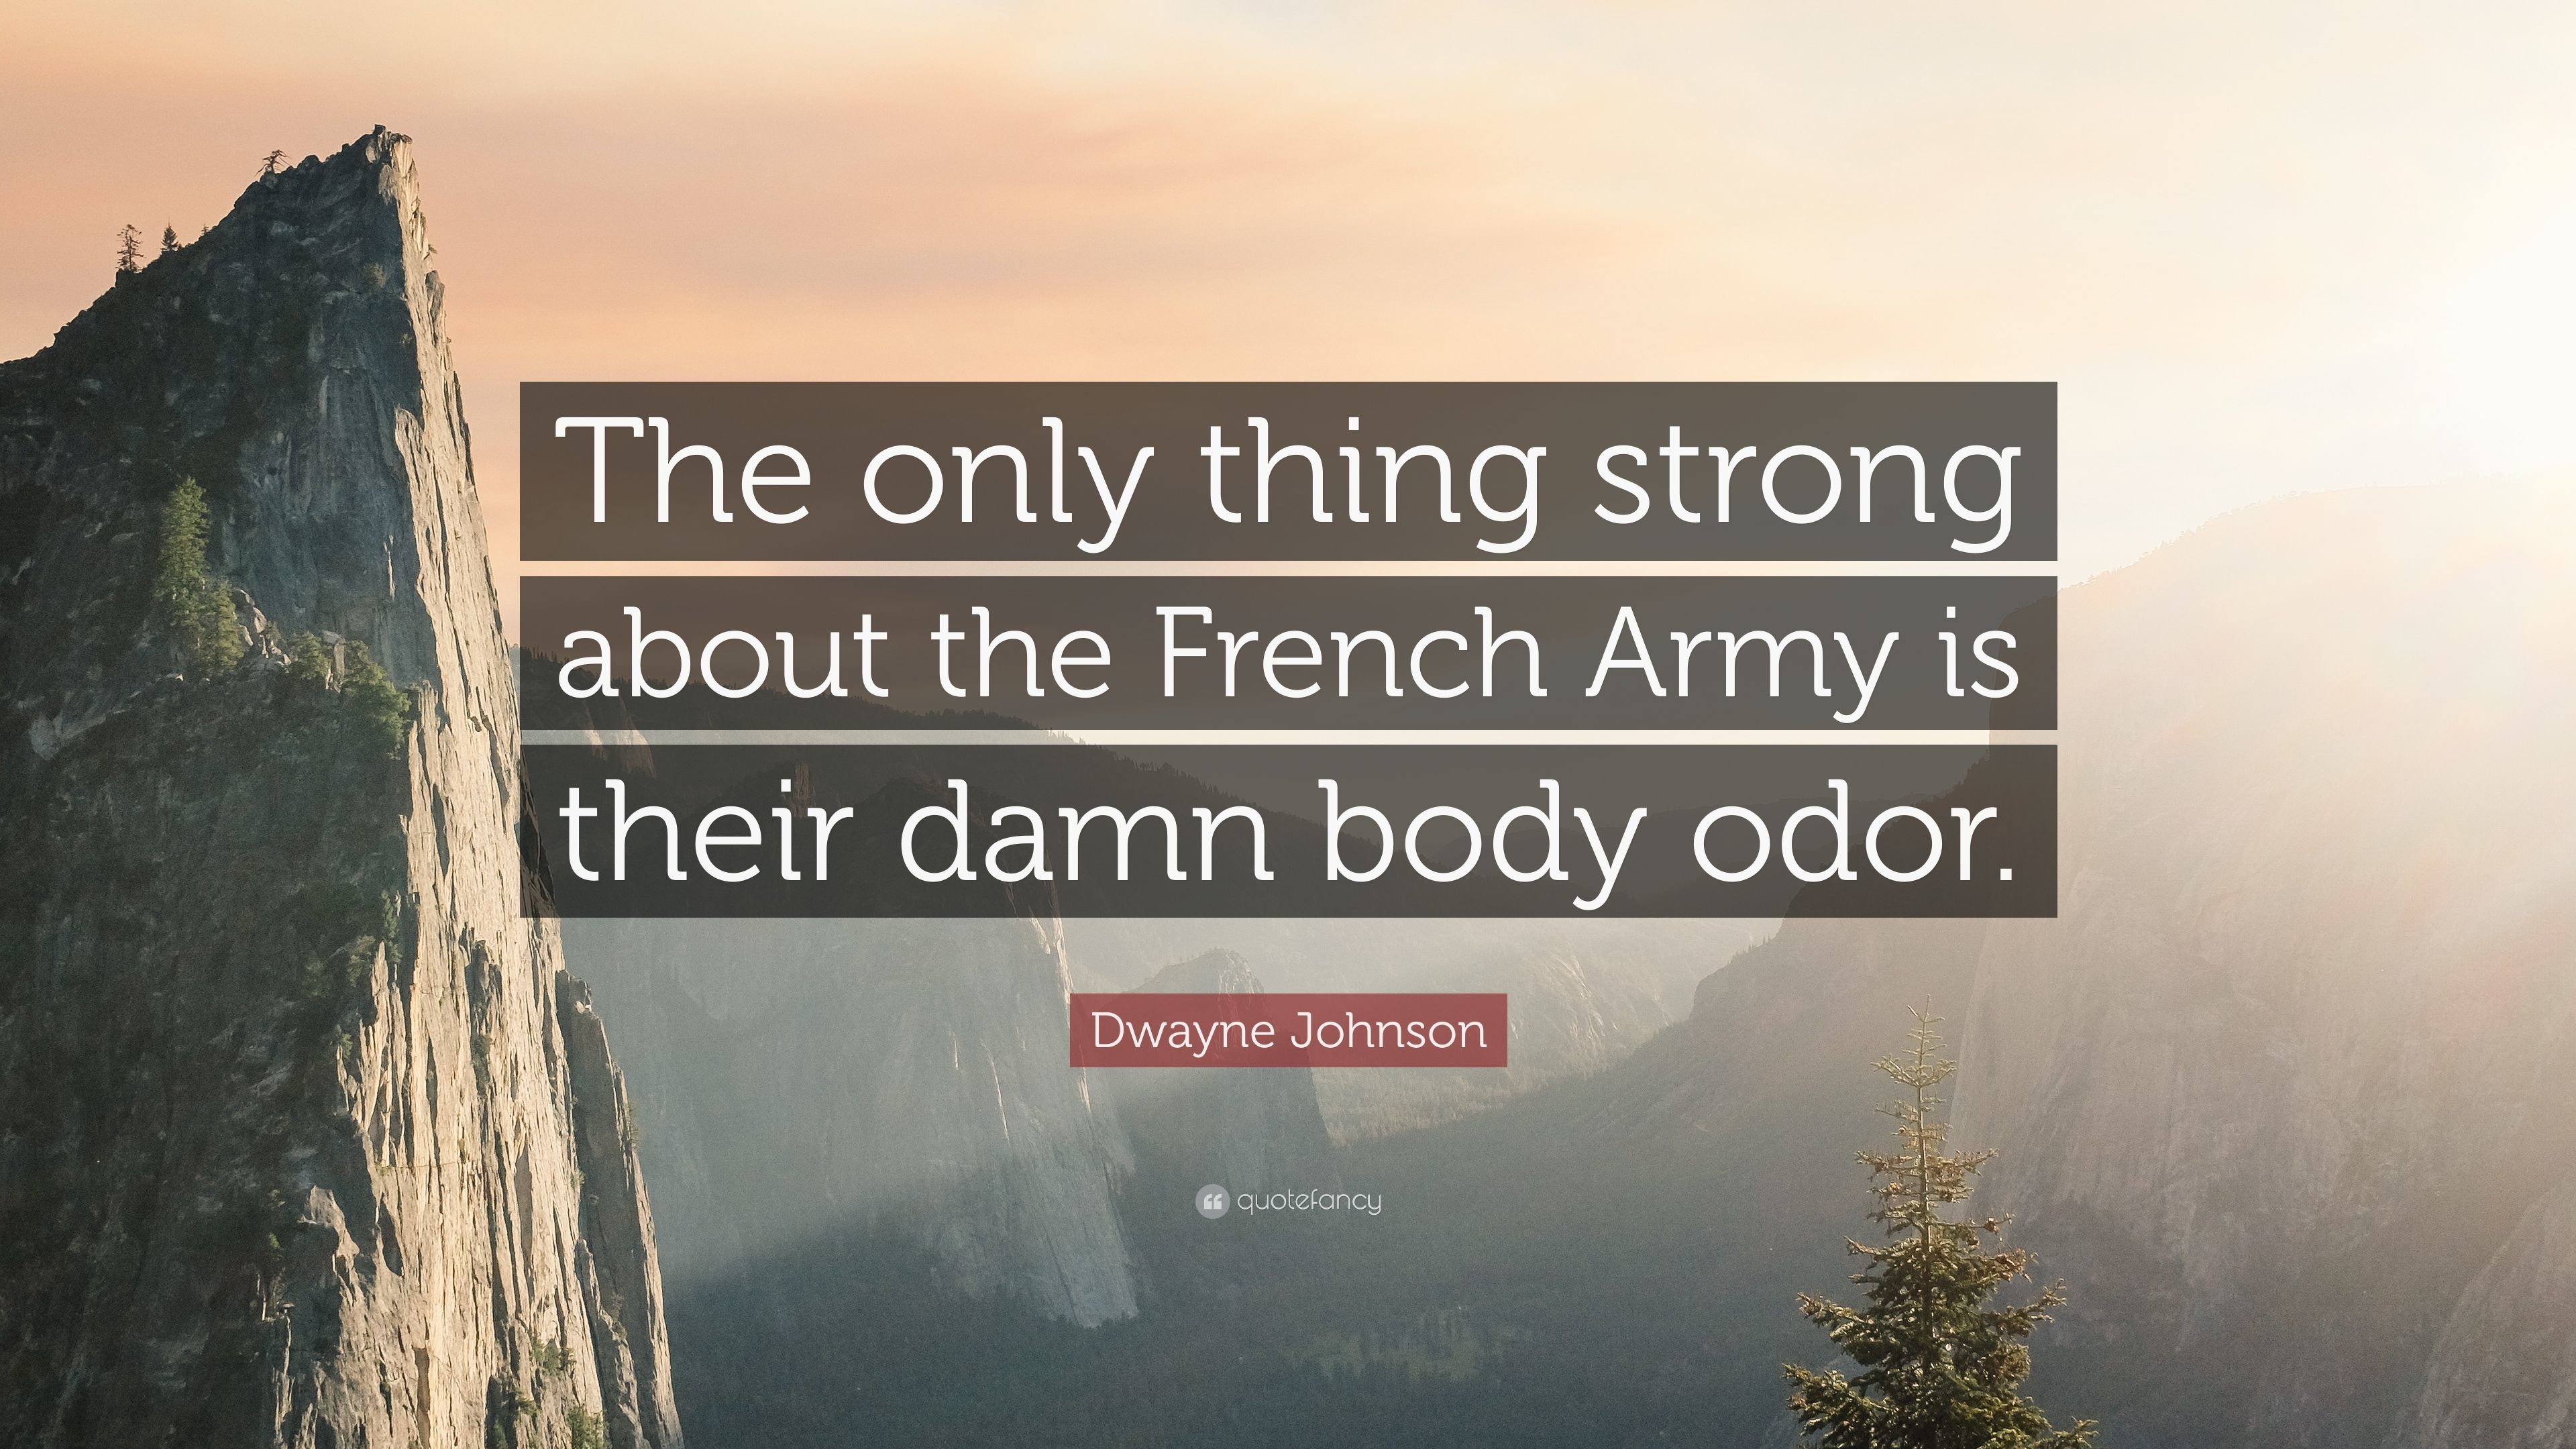 3840x2160 Dwayne Johnson Quote: “The only thing strong about the French Army is their  damn